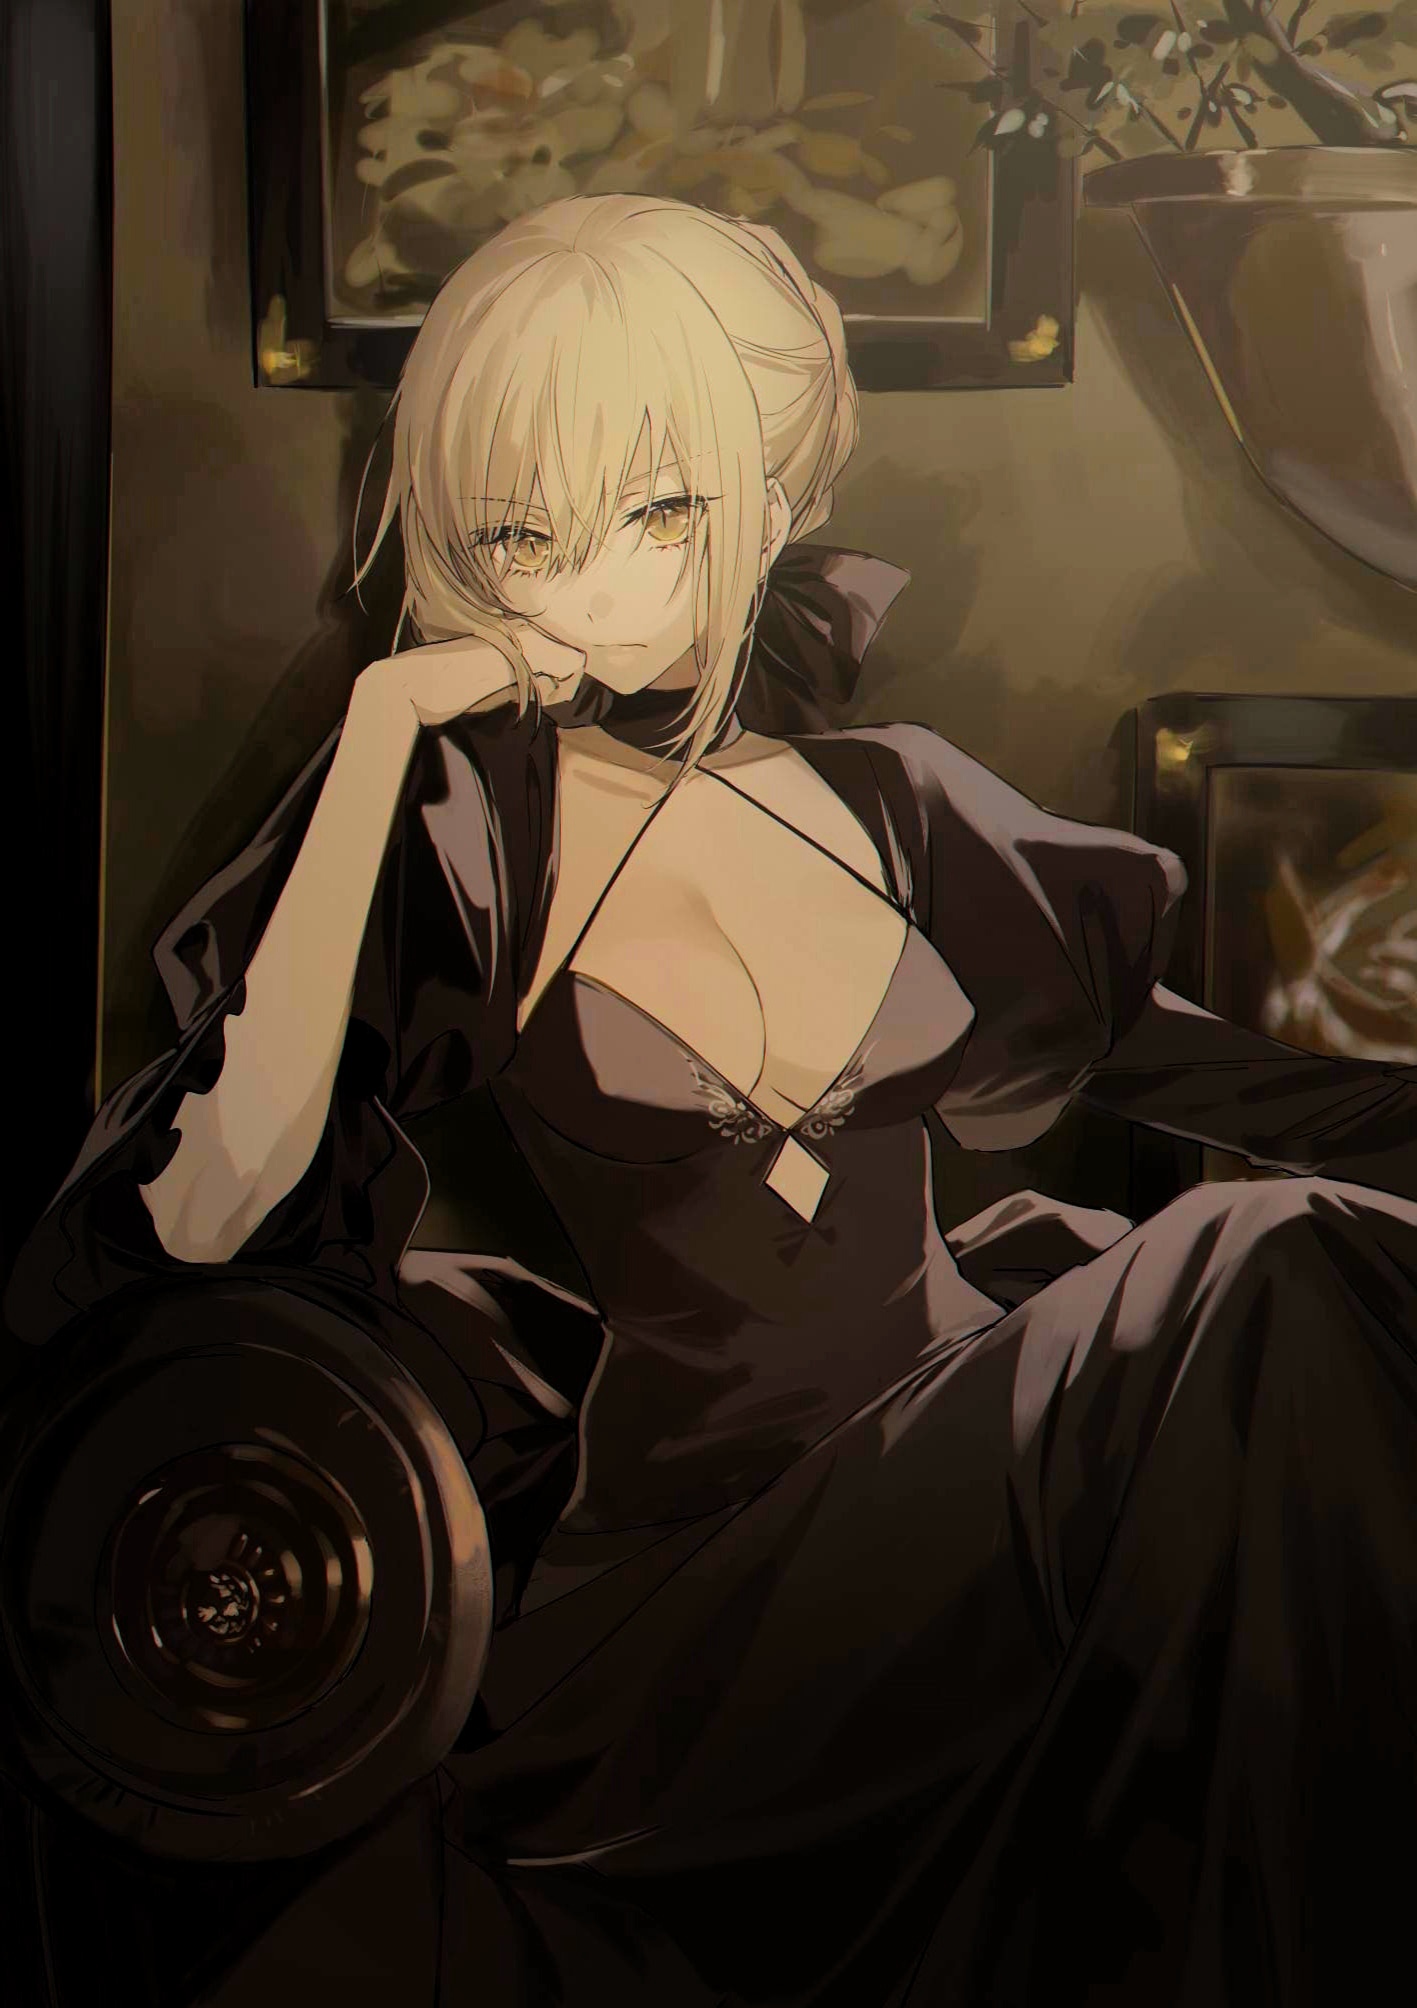 Anime 1417x2008 anime anime girls Fate series blonde yellow eyes Saber Alter Artoria Pendragon fate/stay night: heaven's feel Fate/Grand Order